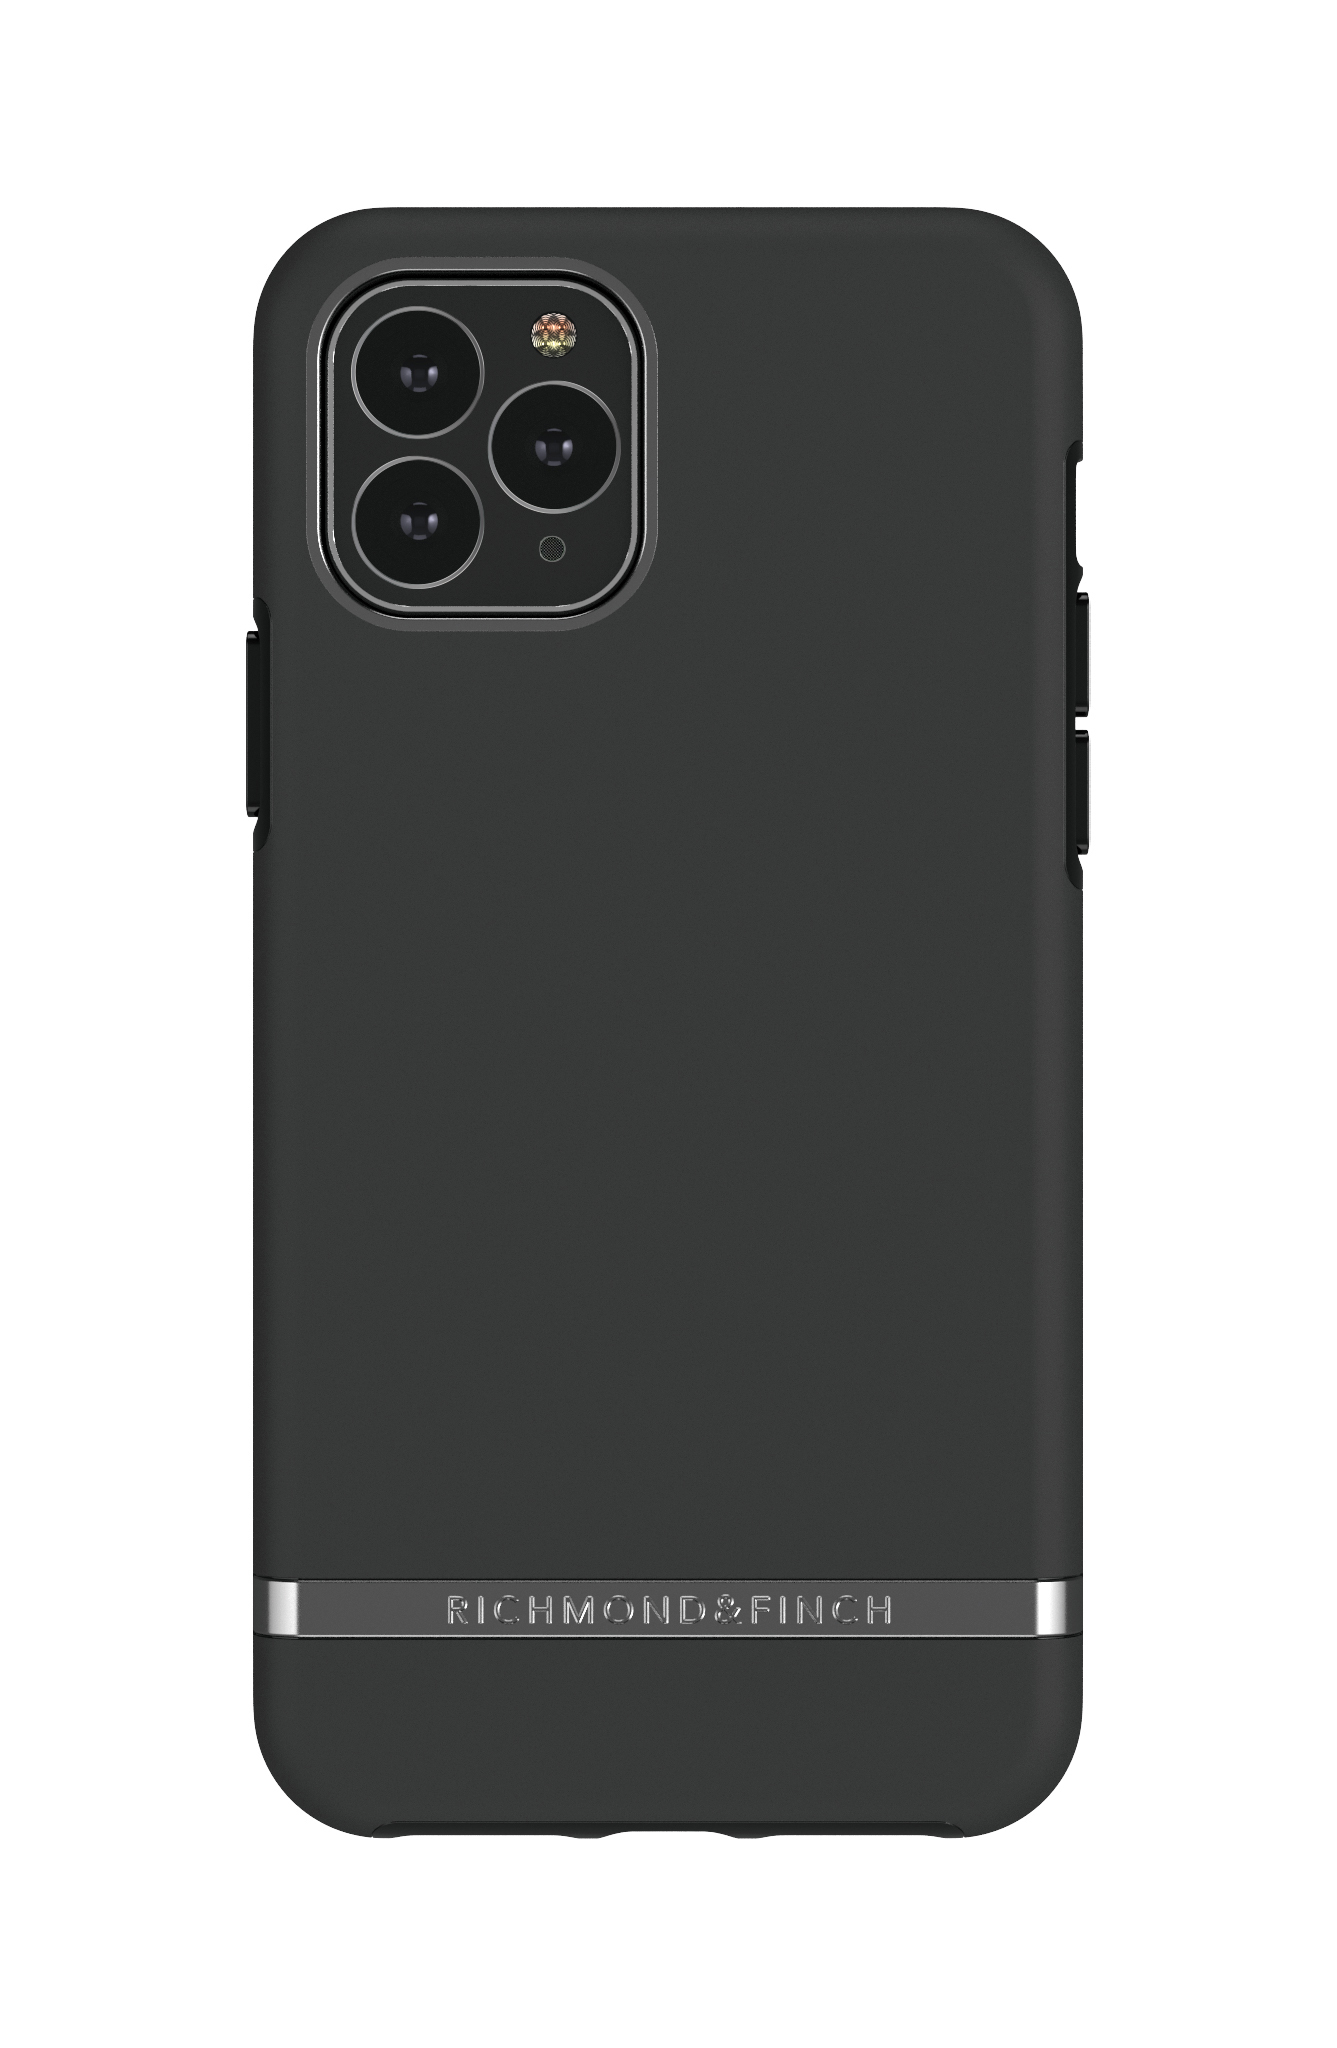 RICHMOND & BLACK IPHONE 11 PRO, APPLE, Backcover, Black FINCH 11 Out iPhone Pro